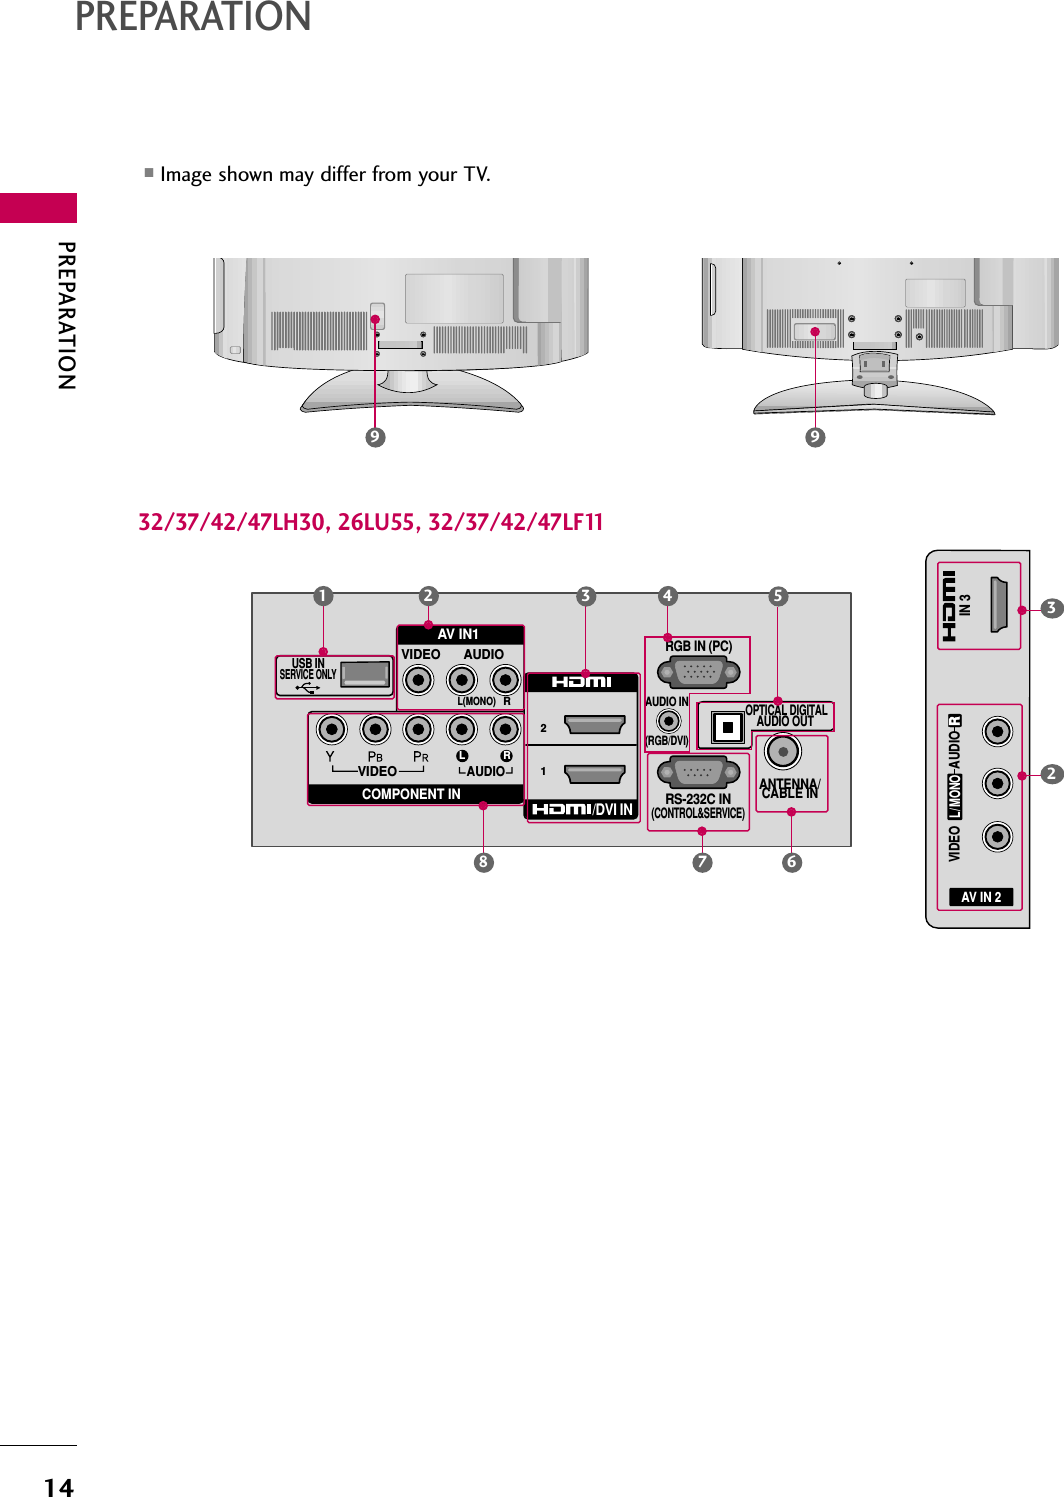 PREPARATION14PREPARATION■Image shown may differ from your TV.AV IN 2L/MONORAUDIOVIDEOIN 32332/37/42/47LH30, 26LU55, 32/37/42/47LF11USB INSERVICE ONLYRS-232C IN(CONTROL&amp;SERVICE)AUDIO IN(RGB/DVI)ANTENNA/CABLE INVIDEOAUDIORGB IN (PC)VIDEO AUDIOL(MONO)R21L ROPTICAL DIGITALAUDIO OUT /DVI INCOMPONENT INAV IN1R213457 689 9